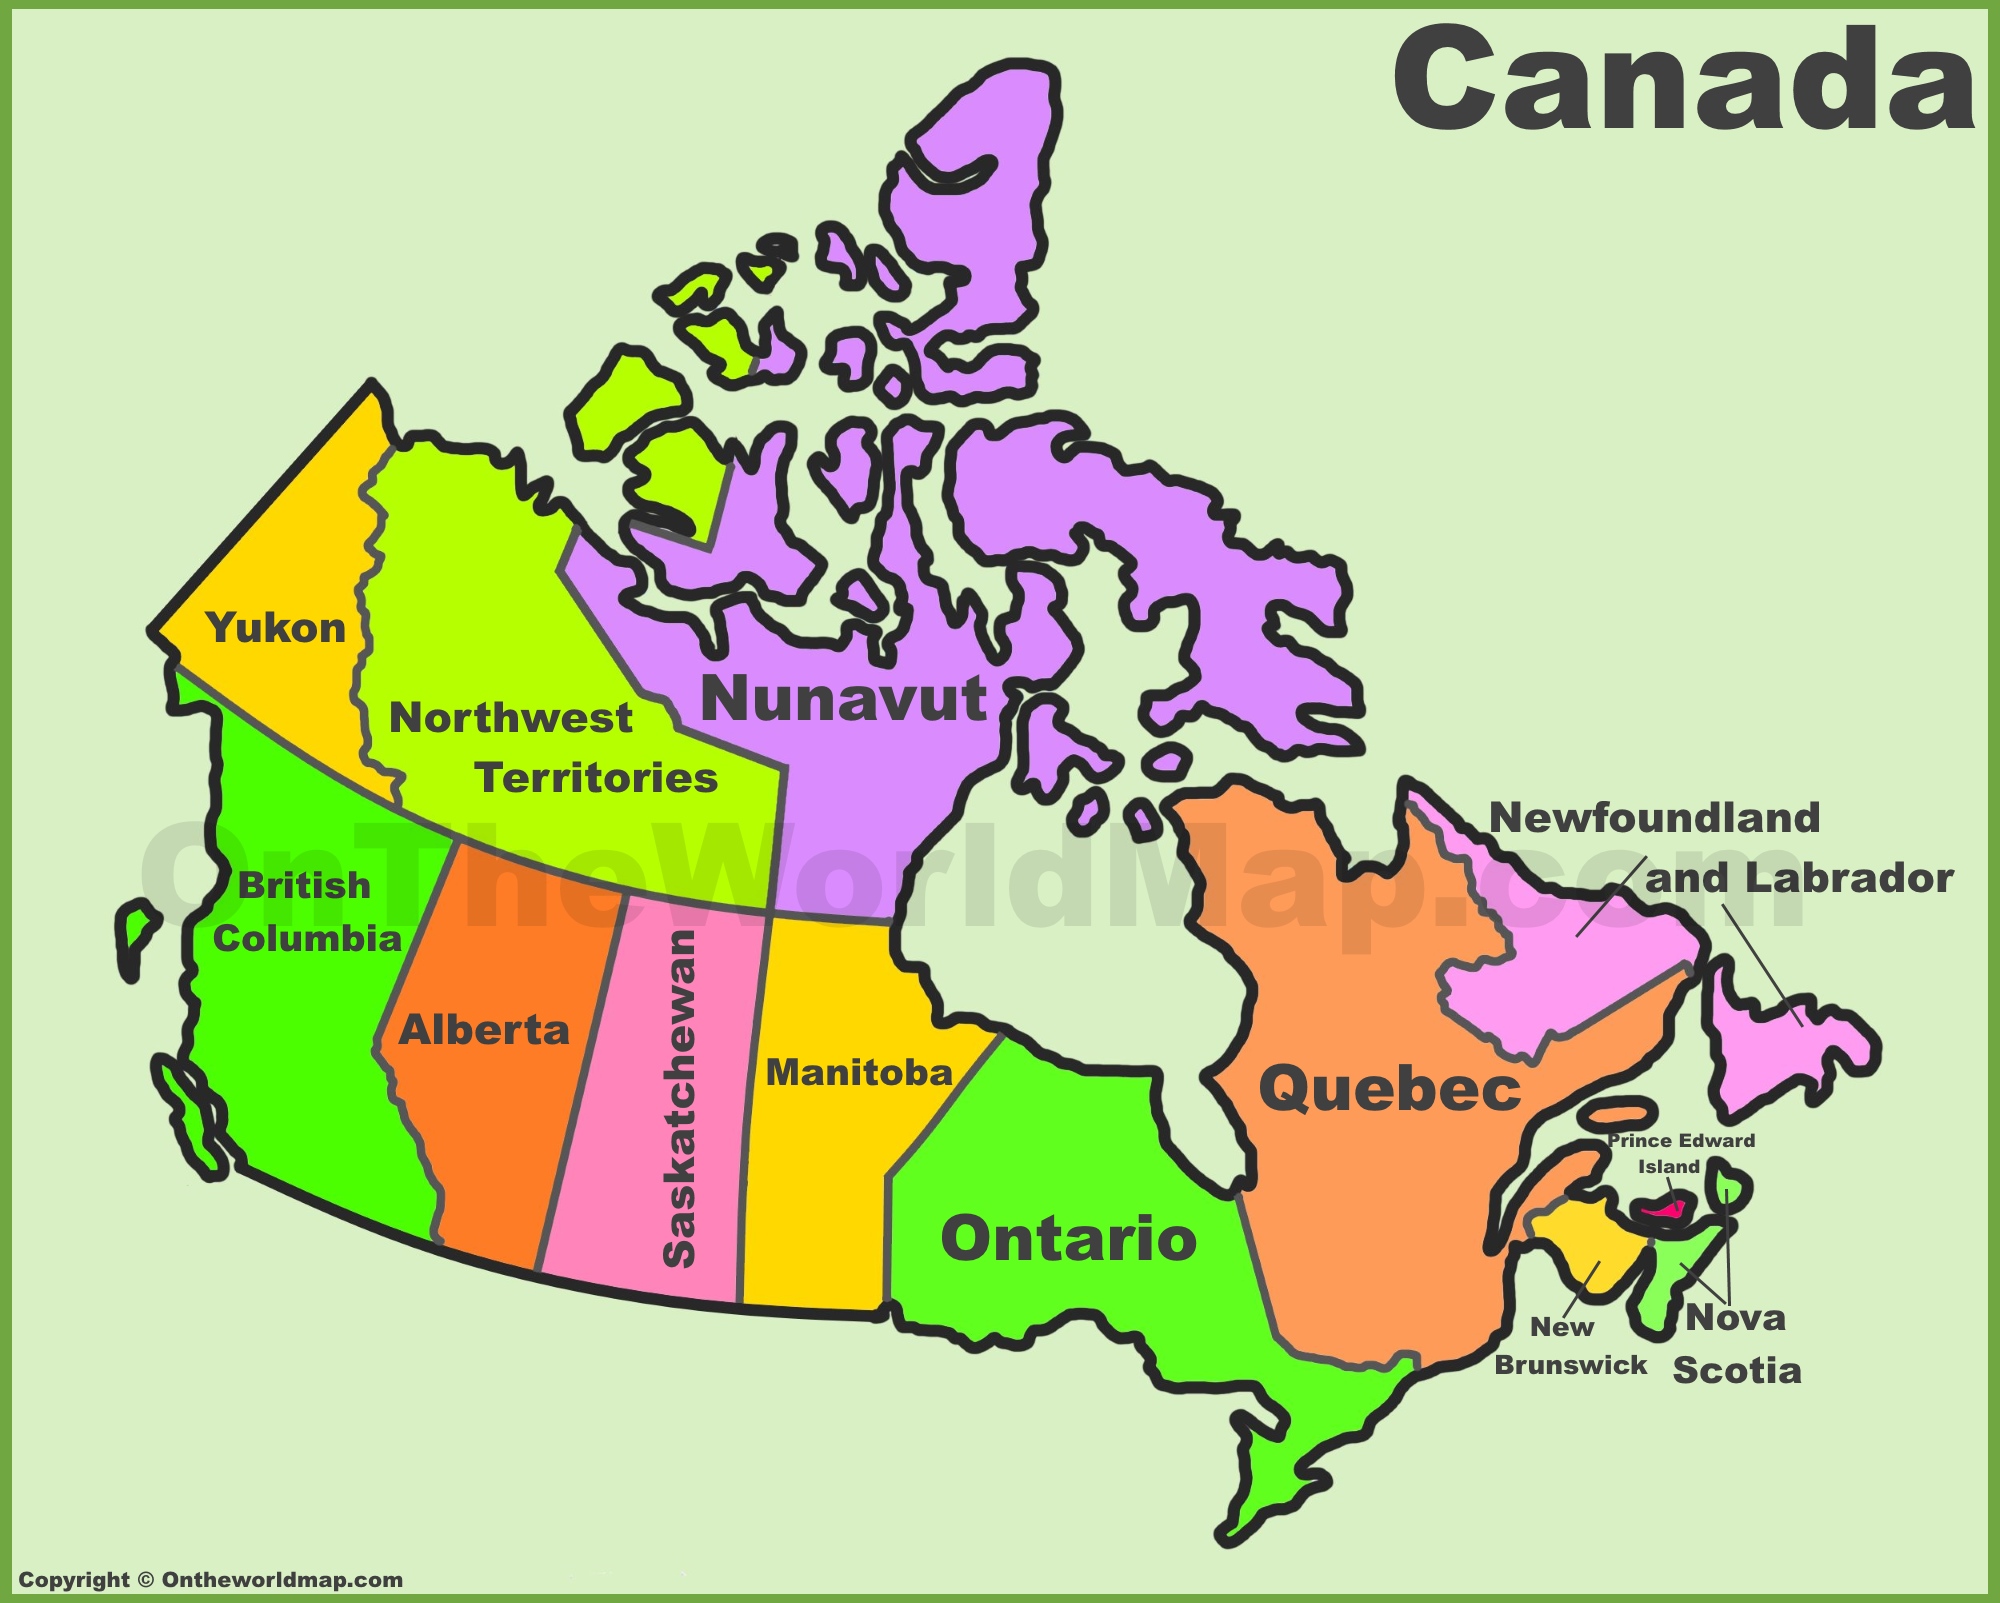 Canada Provinces And Territories Map List Of Canada Provinces